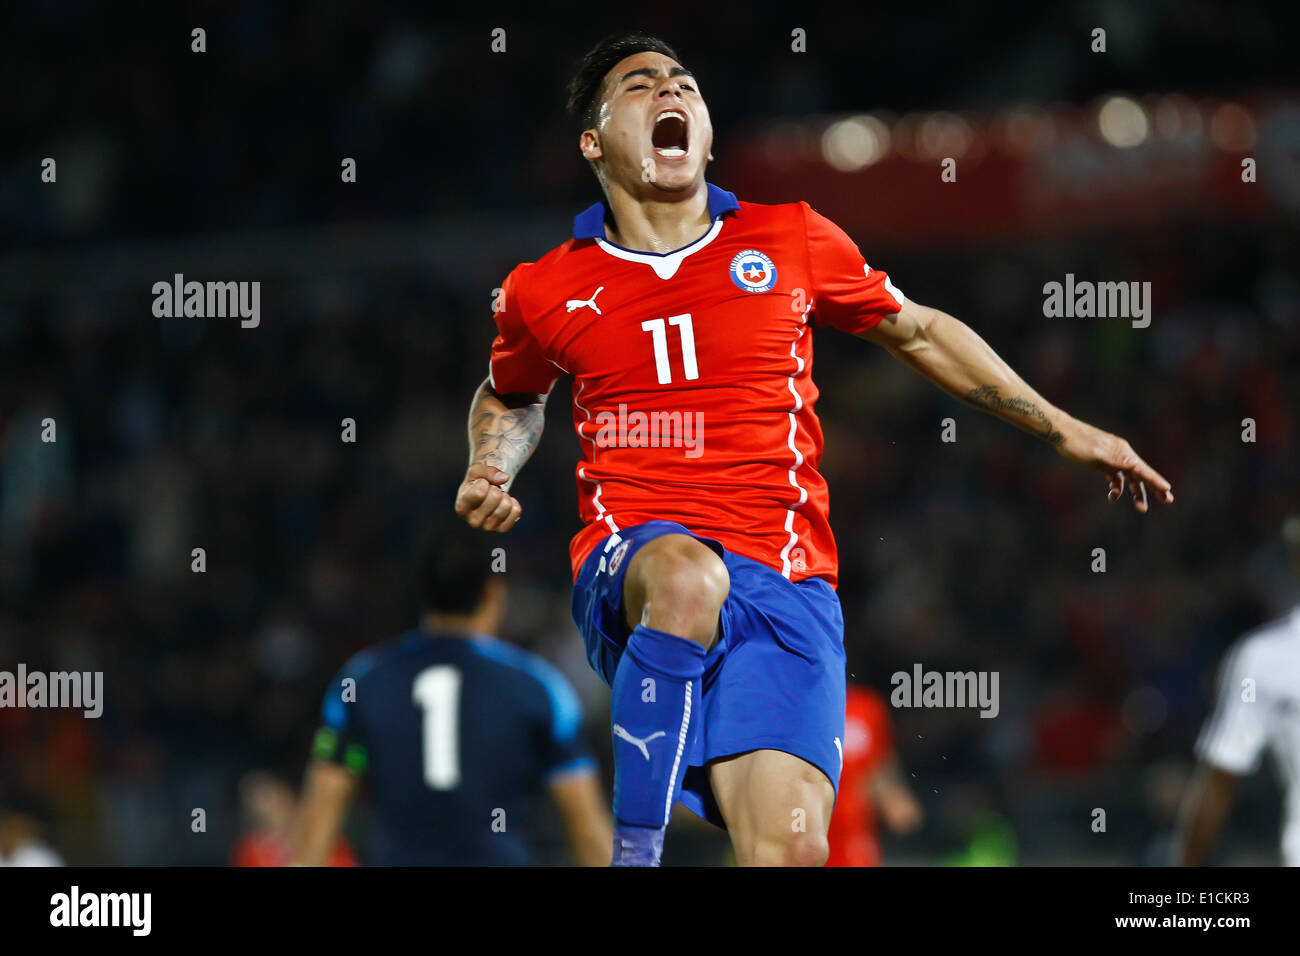 Santiago, Chile. 30th May, 2014. Eduardo Vargas of Chile celebrates his goal during the international friendly soccer match against Eygpt in Santiago City, capital of Chile, on May 30, 2014. © Stringer/Xinhua/Alamy Live News Stock Photo